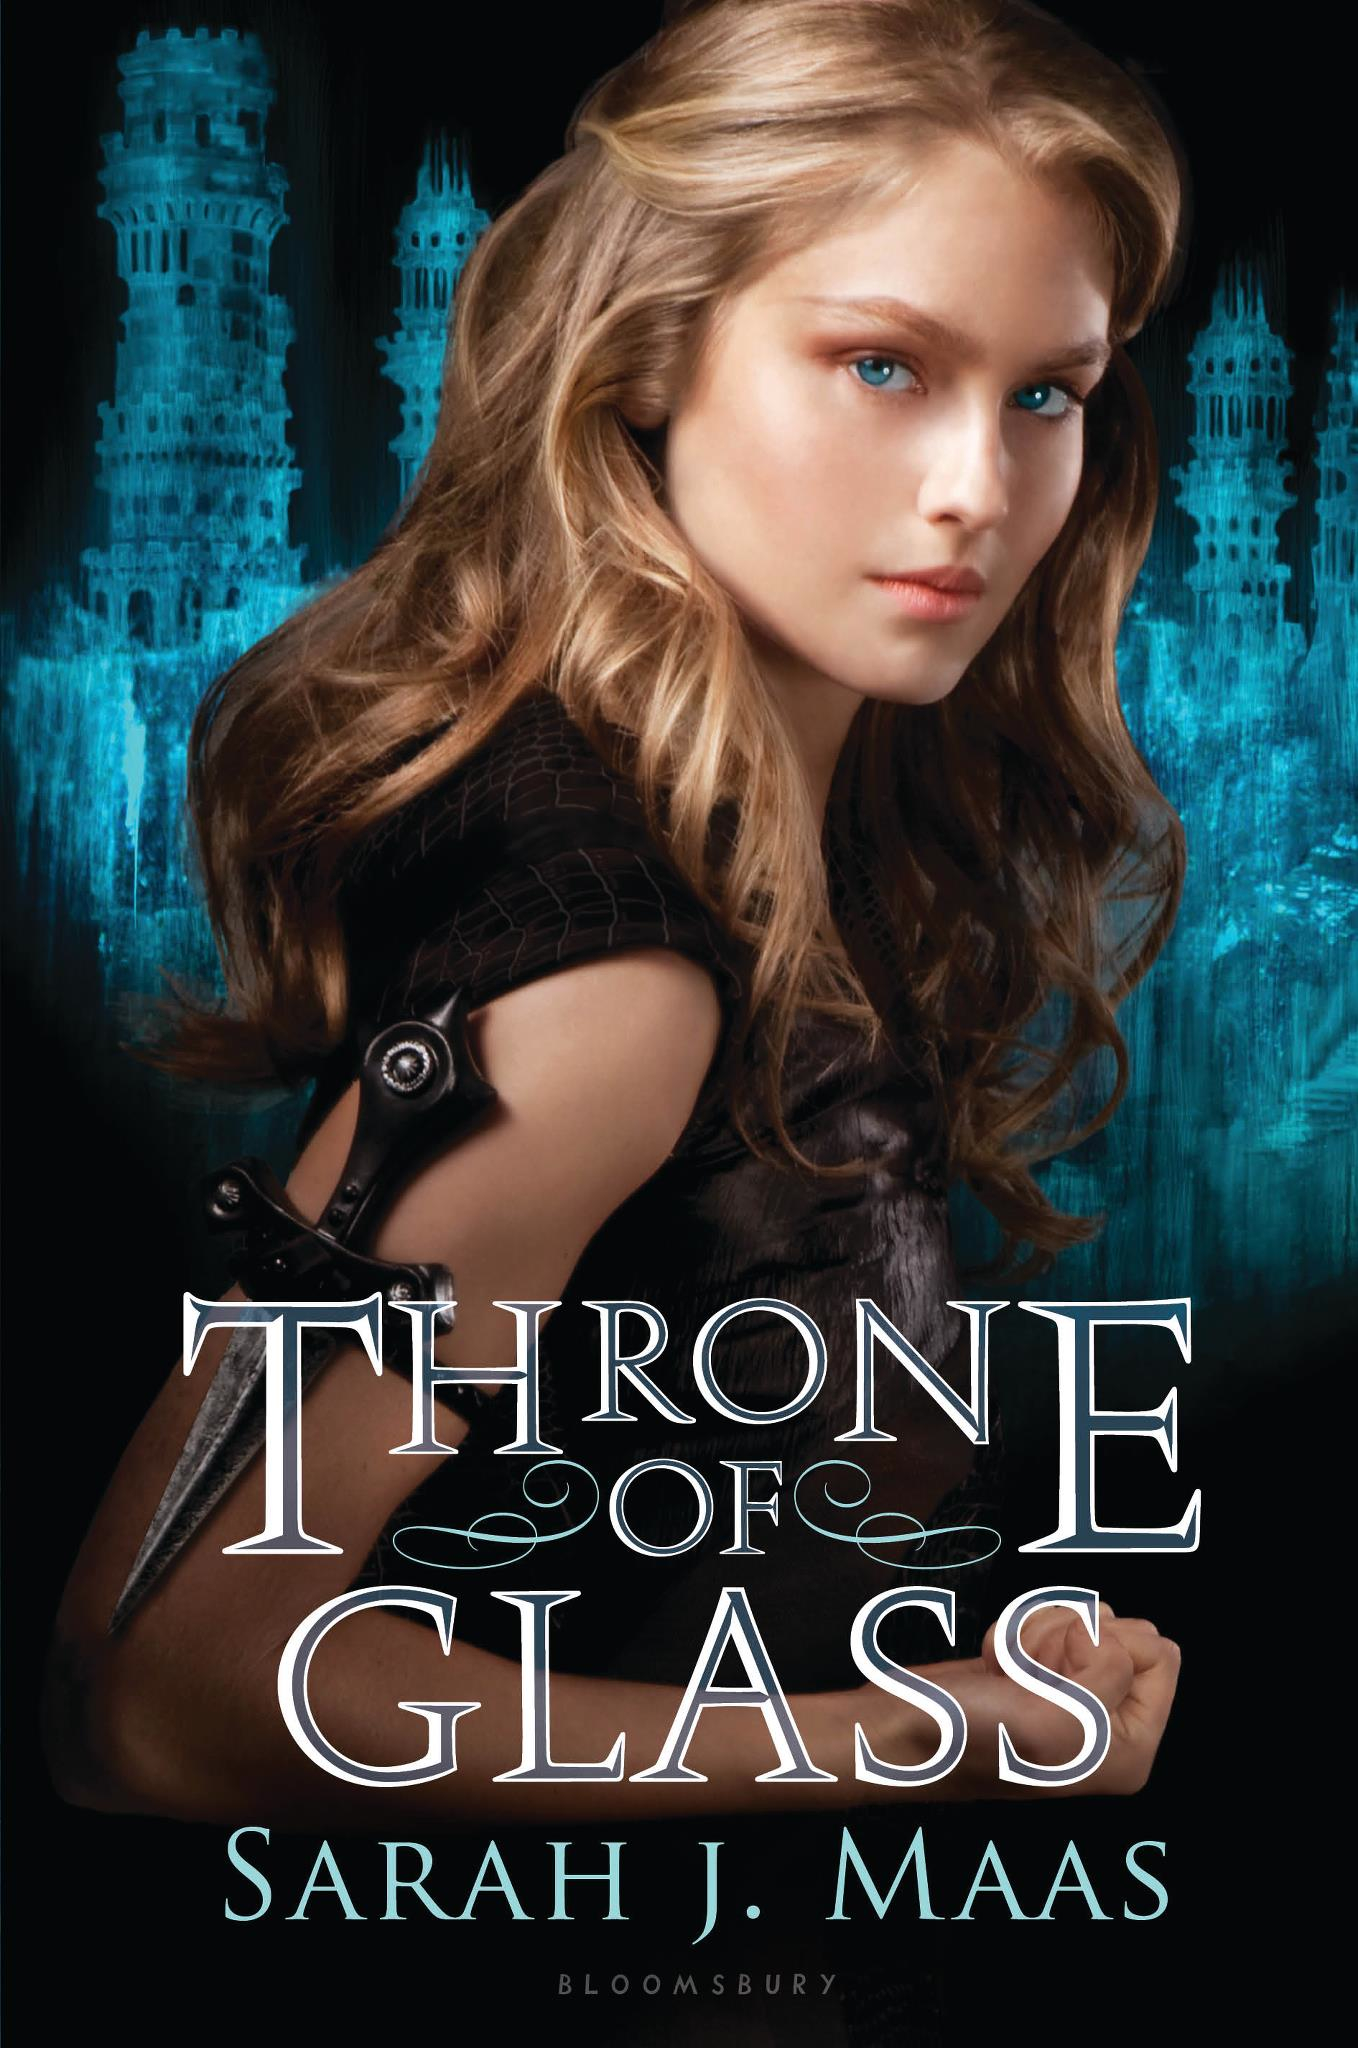 throne-of-glass-by-sarah-j-maas-advance-review